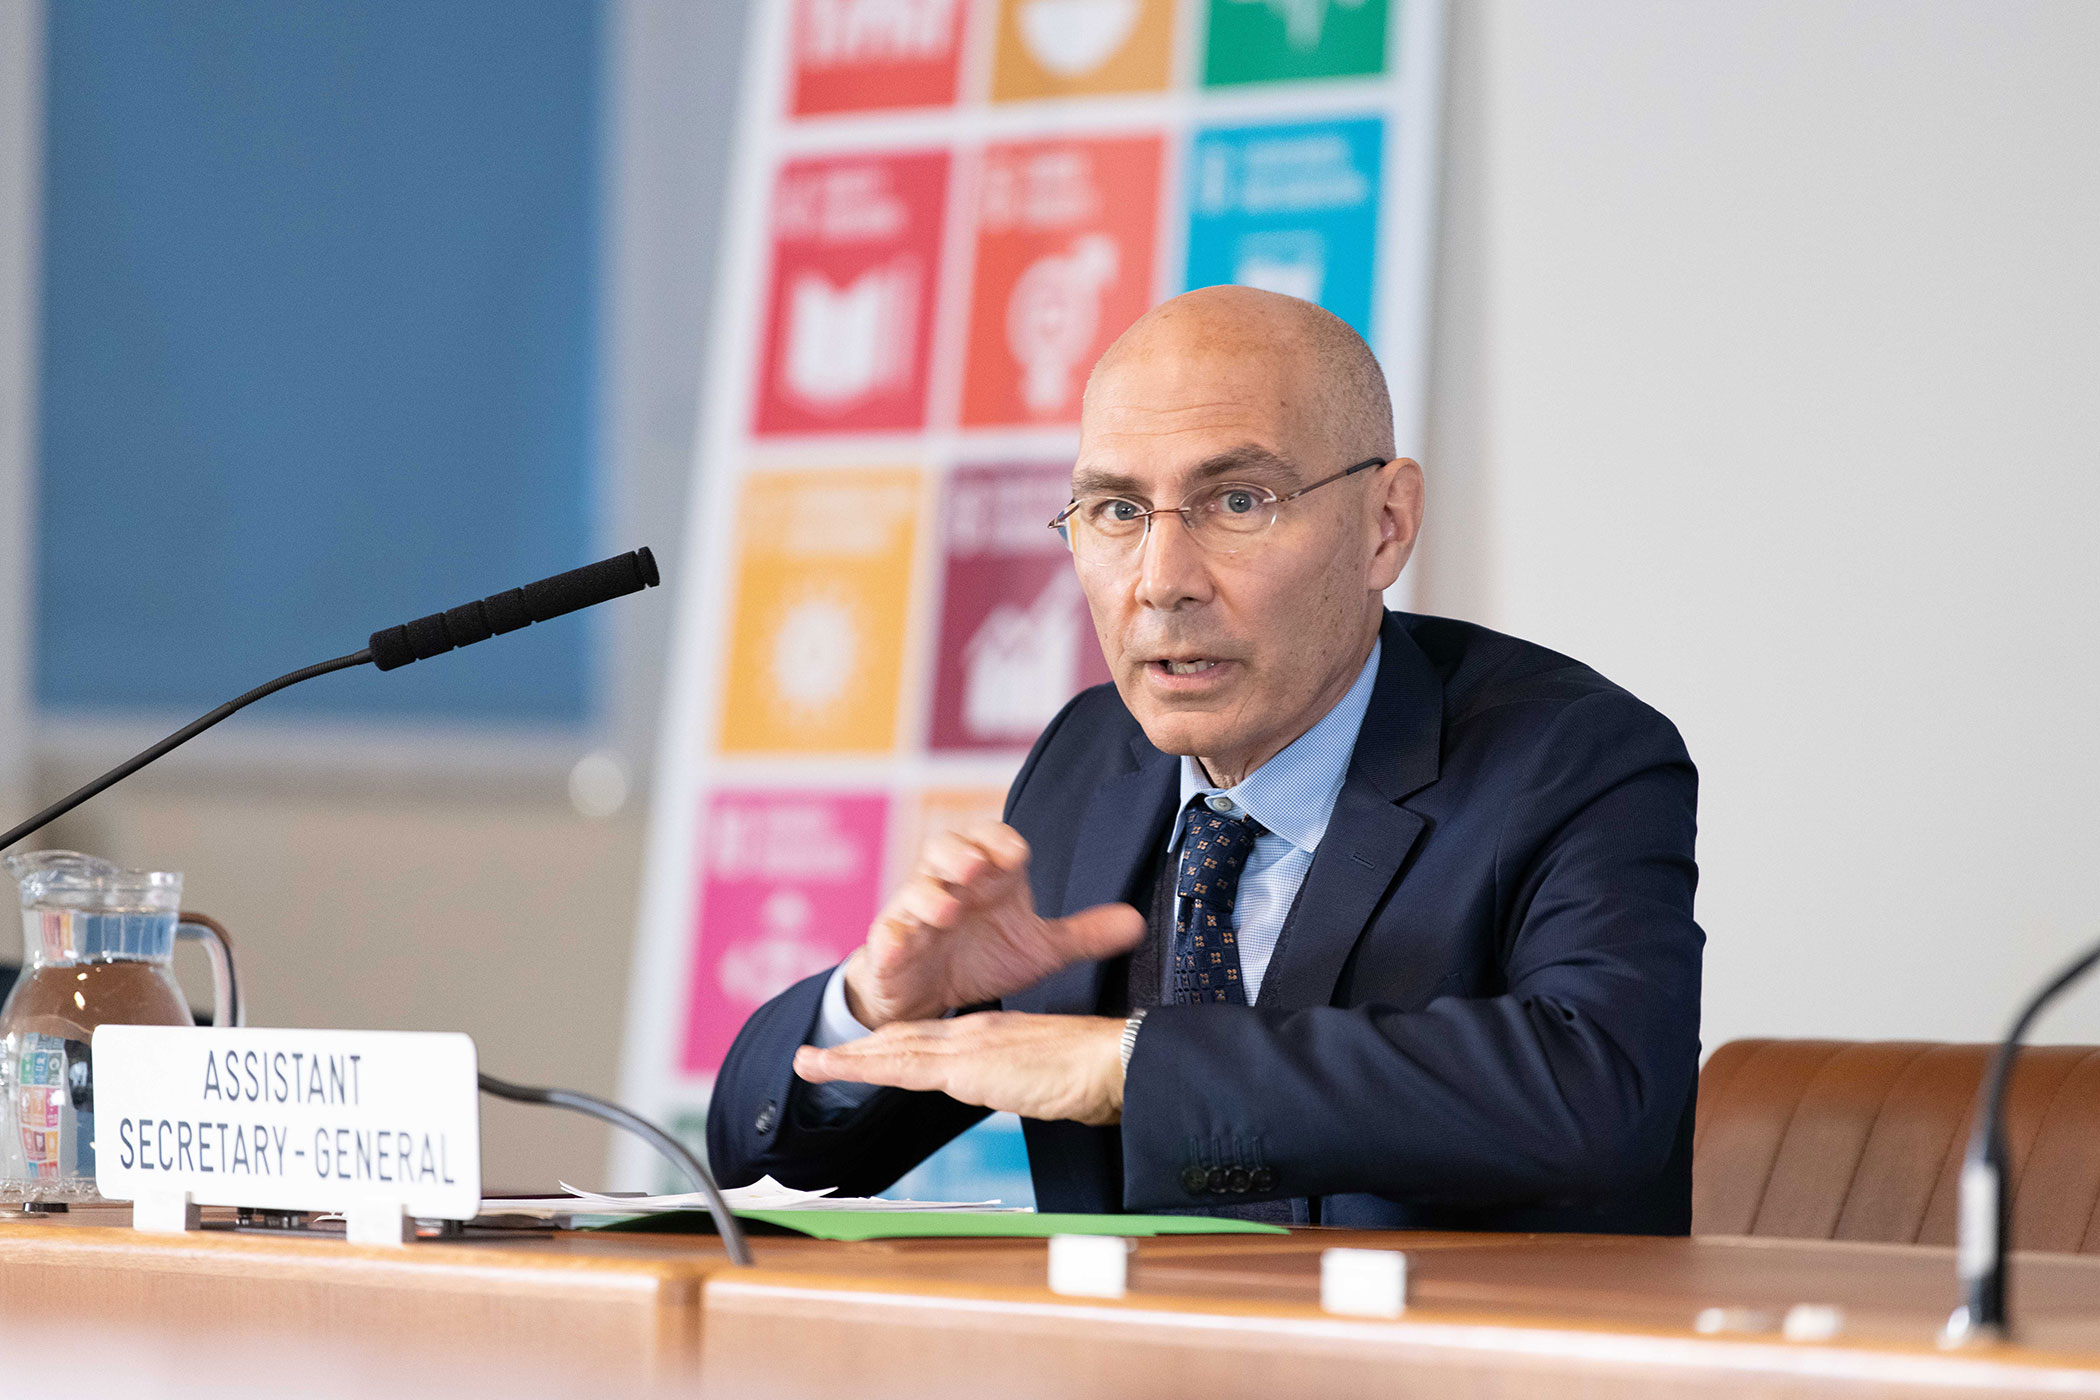 <p><sub><a href="https://www.ohchr.org/en/about-us/high-commissioner/volker-turk">Volker Türk</a>, United Nations High Commissioner for Human Rights</sub></p>